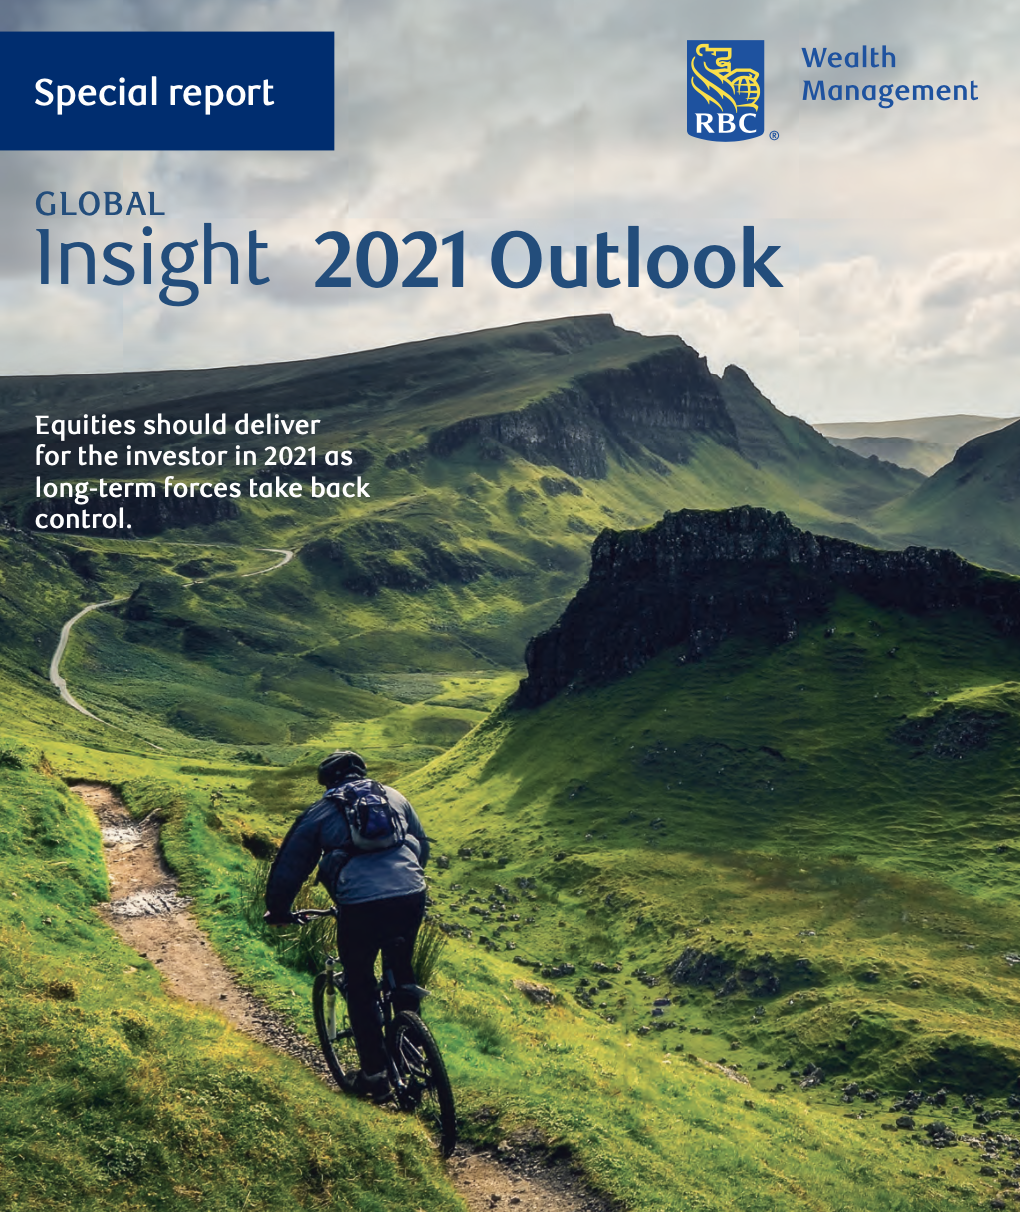 Special Report for Global Insight Outlook 2021 in page image